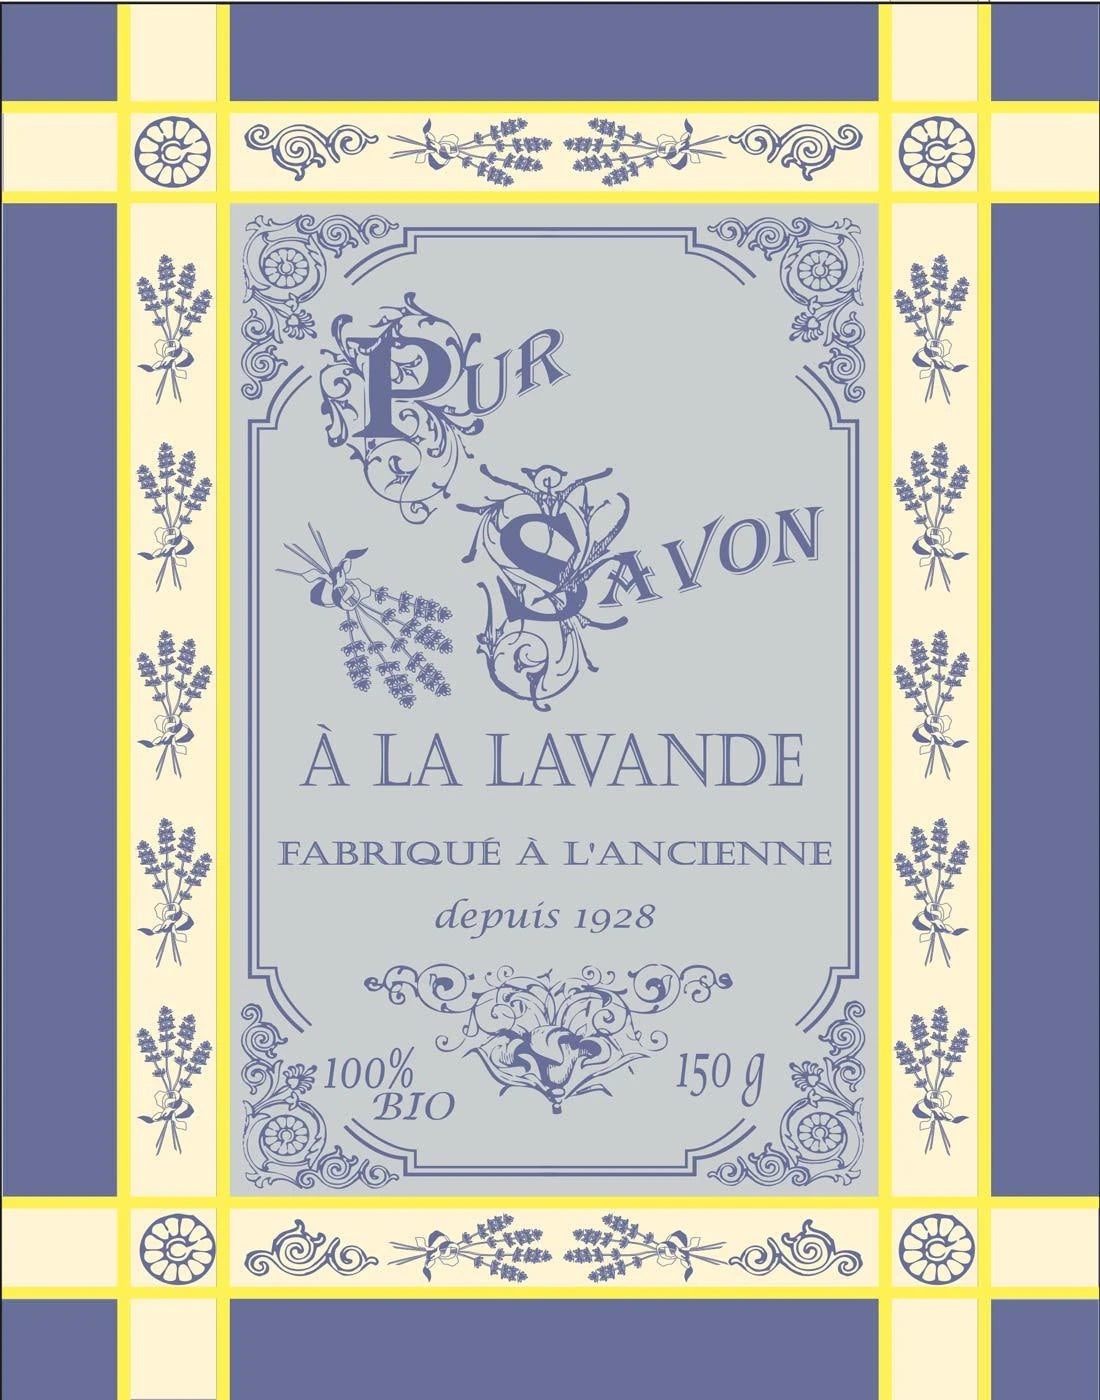 Vintage-style lavender soap packaging with elegant Provençal pattern and French text, framed by a yellow and blue border - Pur Savon a la Lavande Tea Towel by Made in Provence.